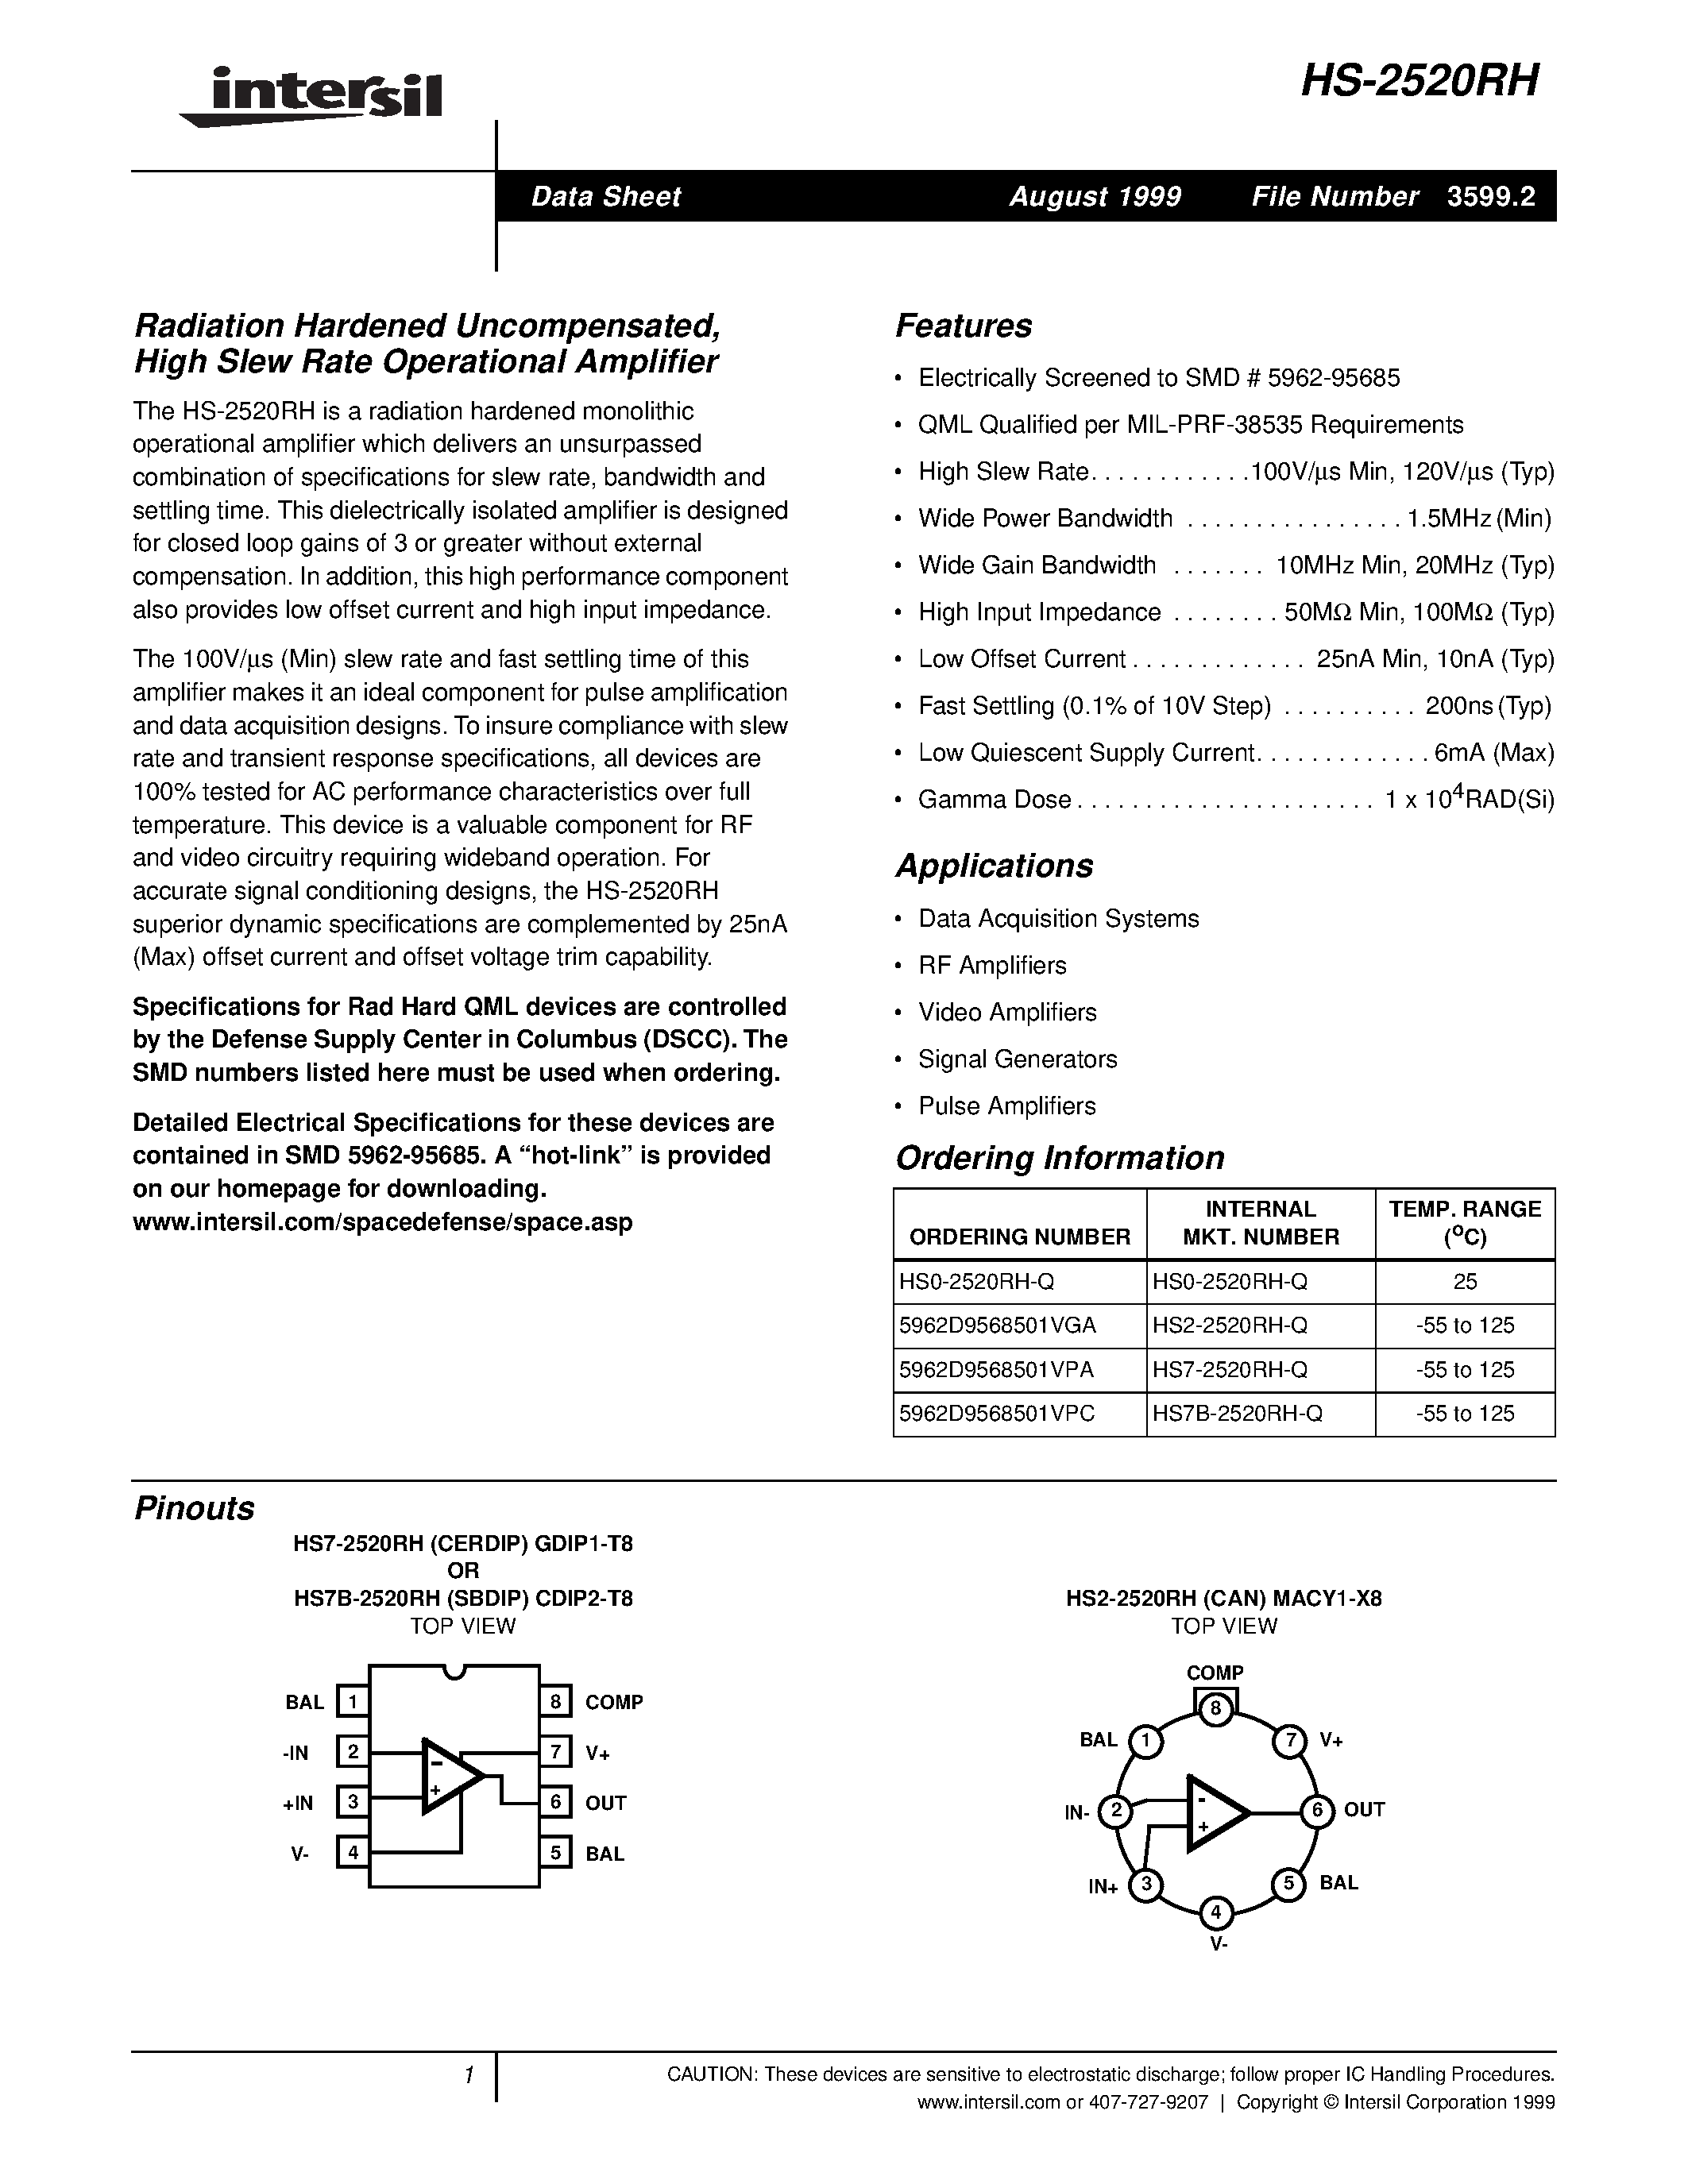 Datasheet HS0-2520RH-Q - Radiation Hardened Uncompensated/ High Slew Rate Operational Amplifier page 1